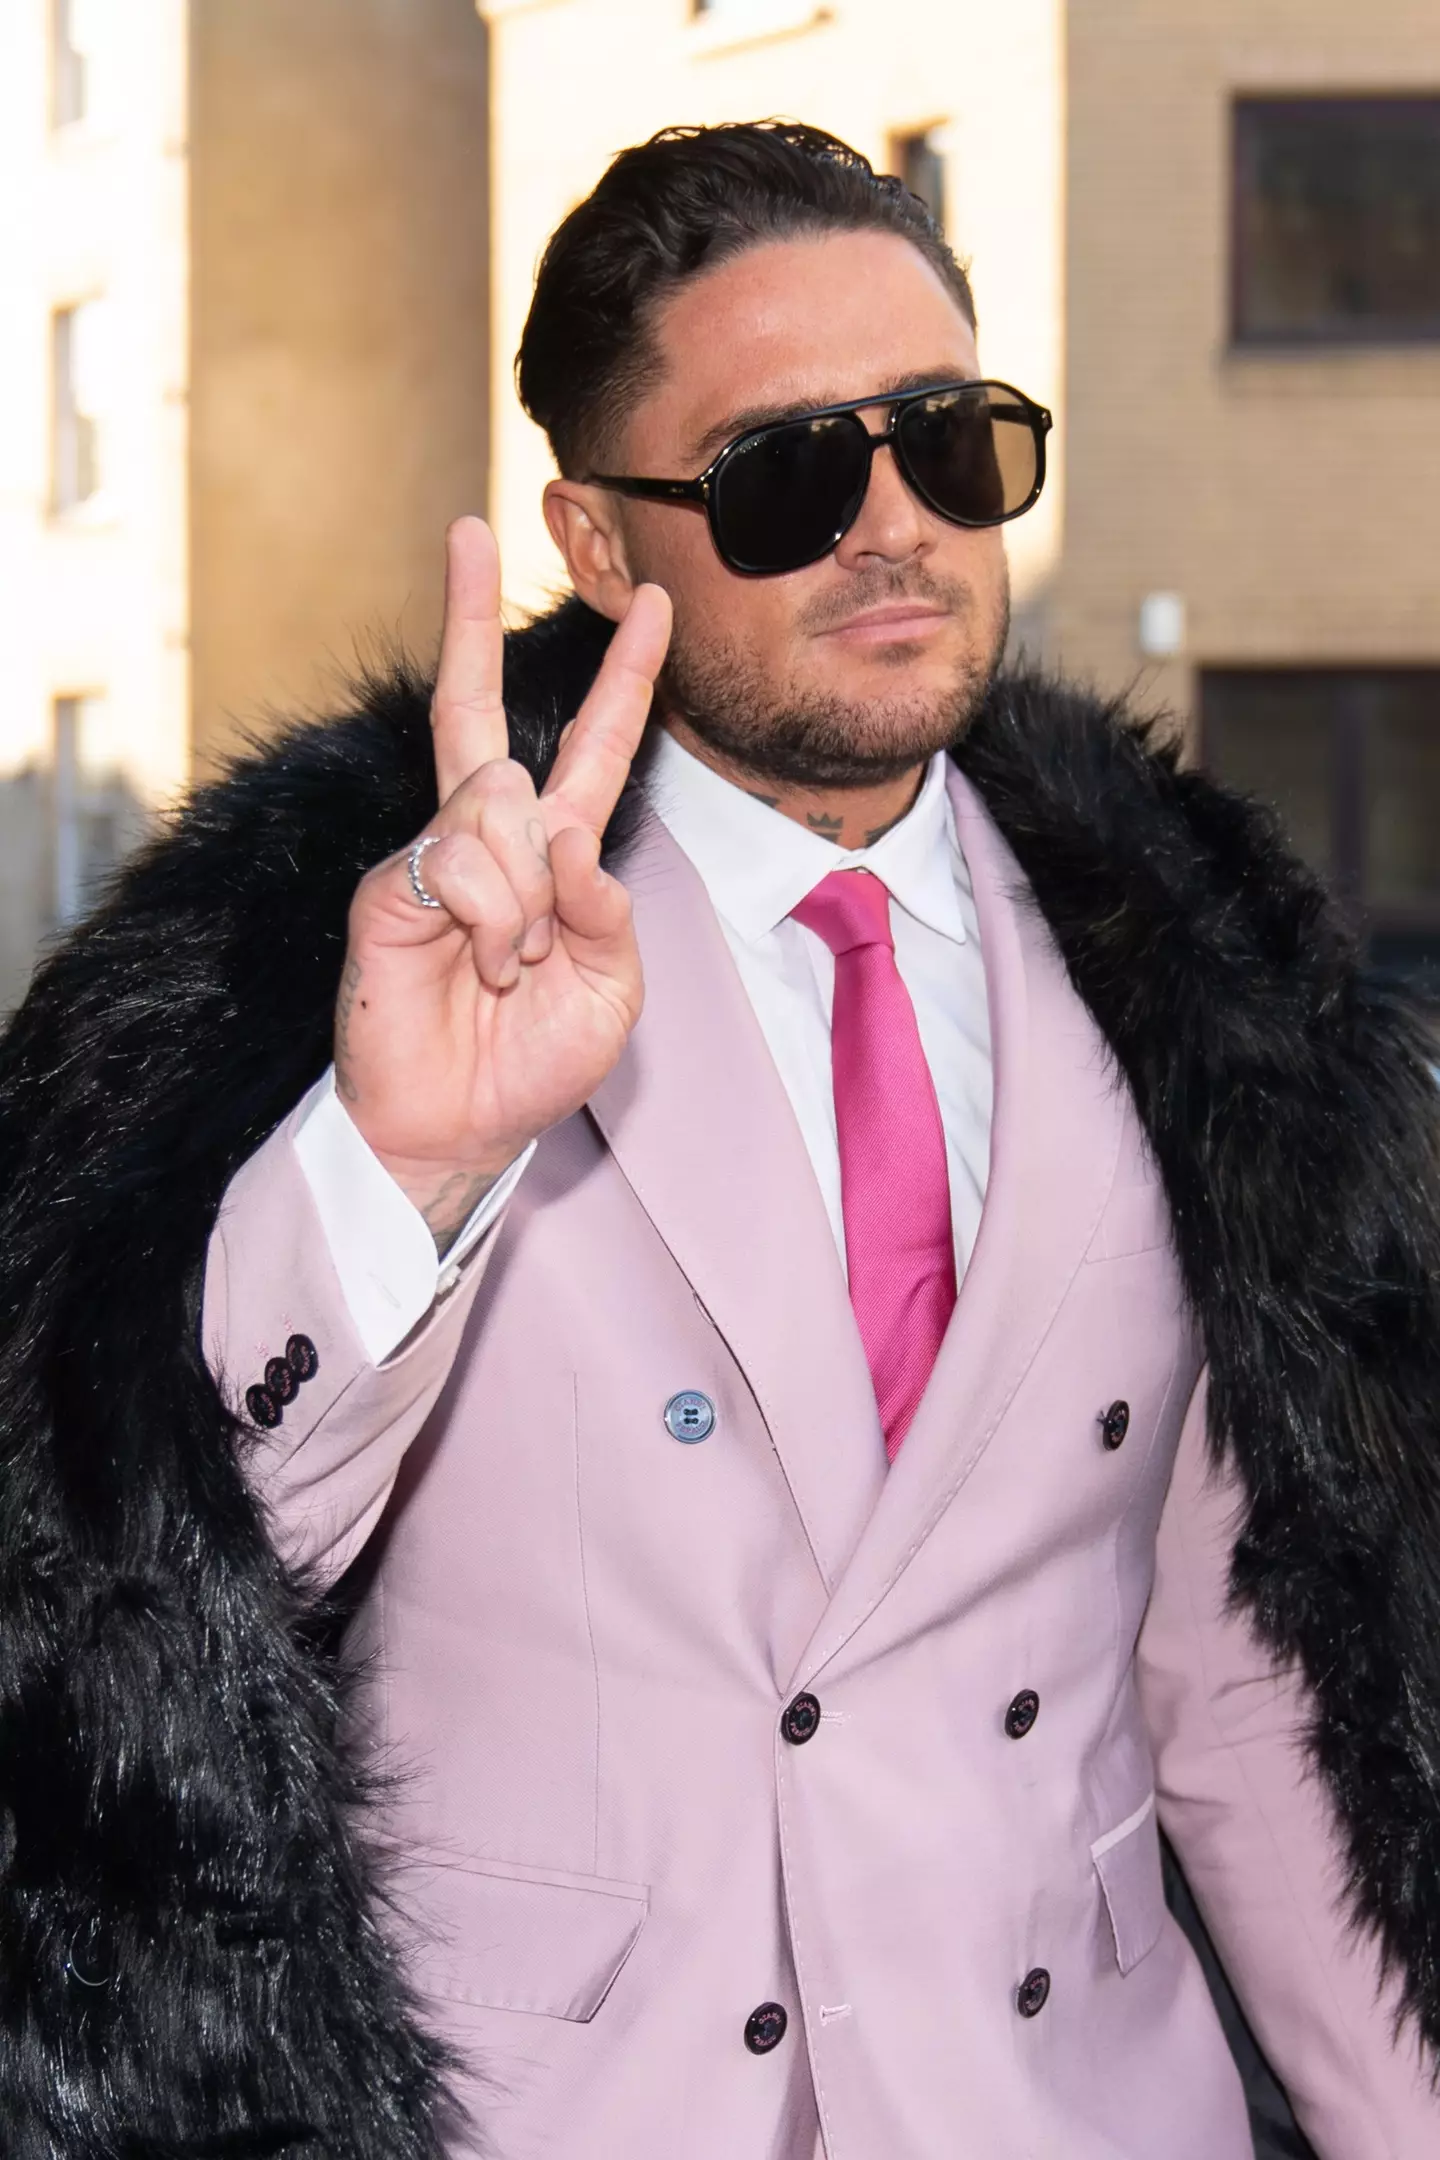 Stephen Bear was convicted of sharing private sexual photos and videos of his ex-girlfriend without her knowledge.